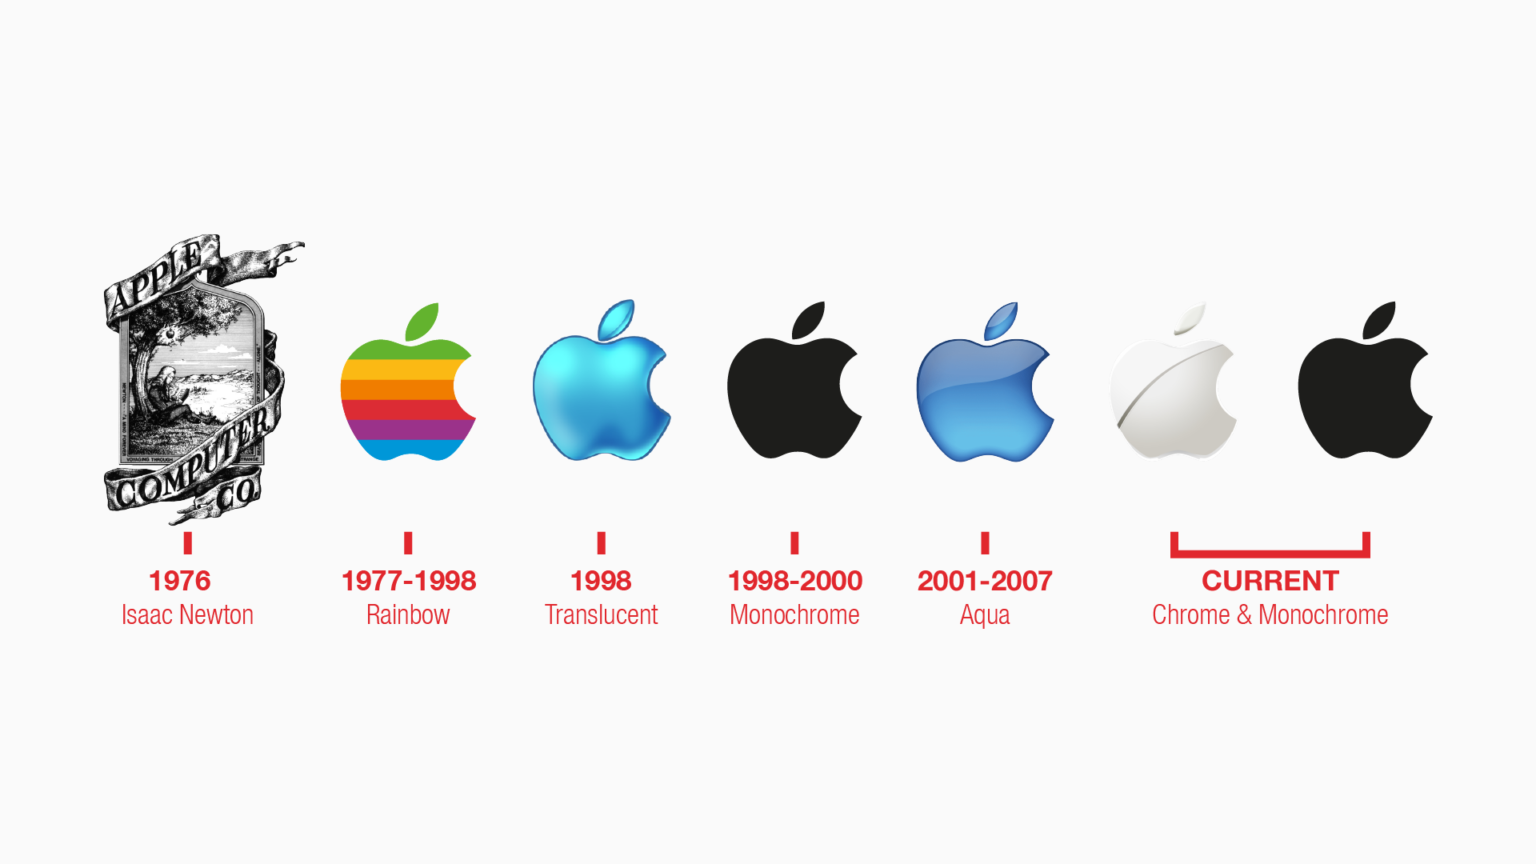 The history of Apple's logo - It wasn't always the shape we now